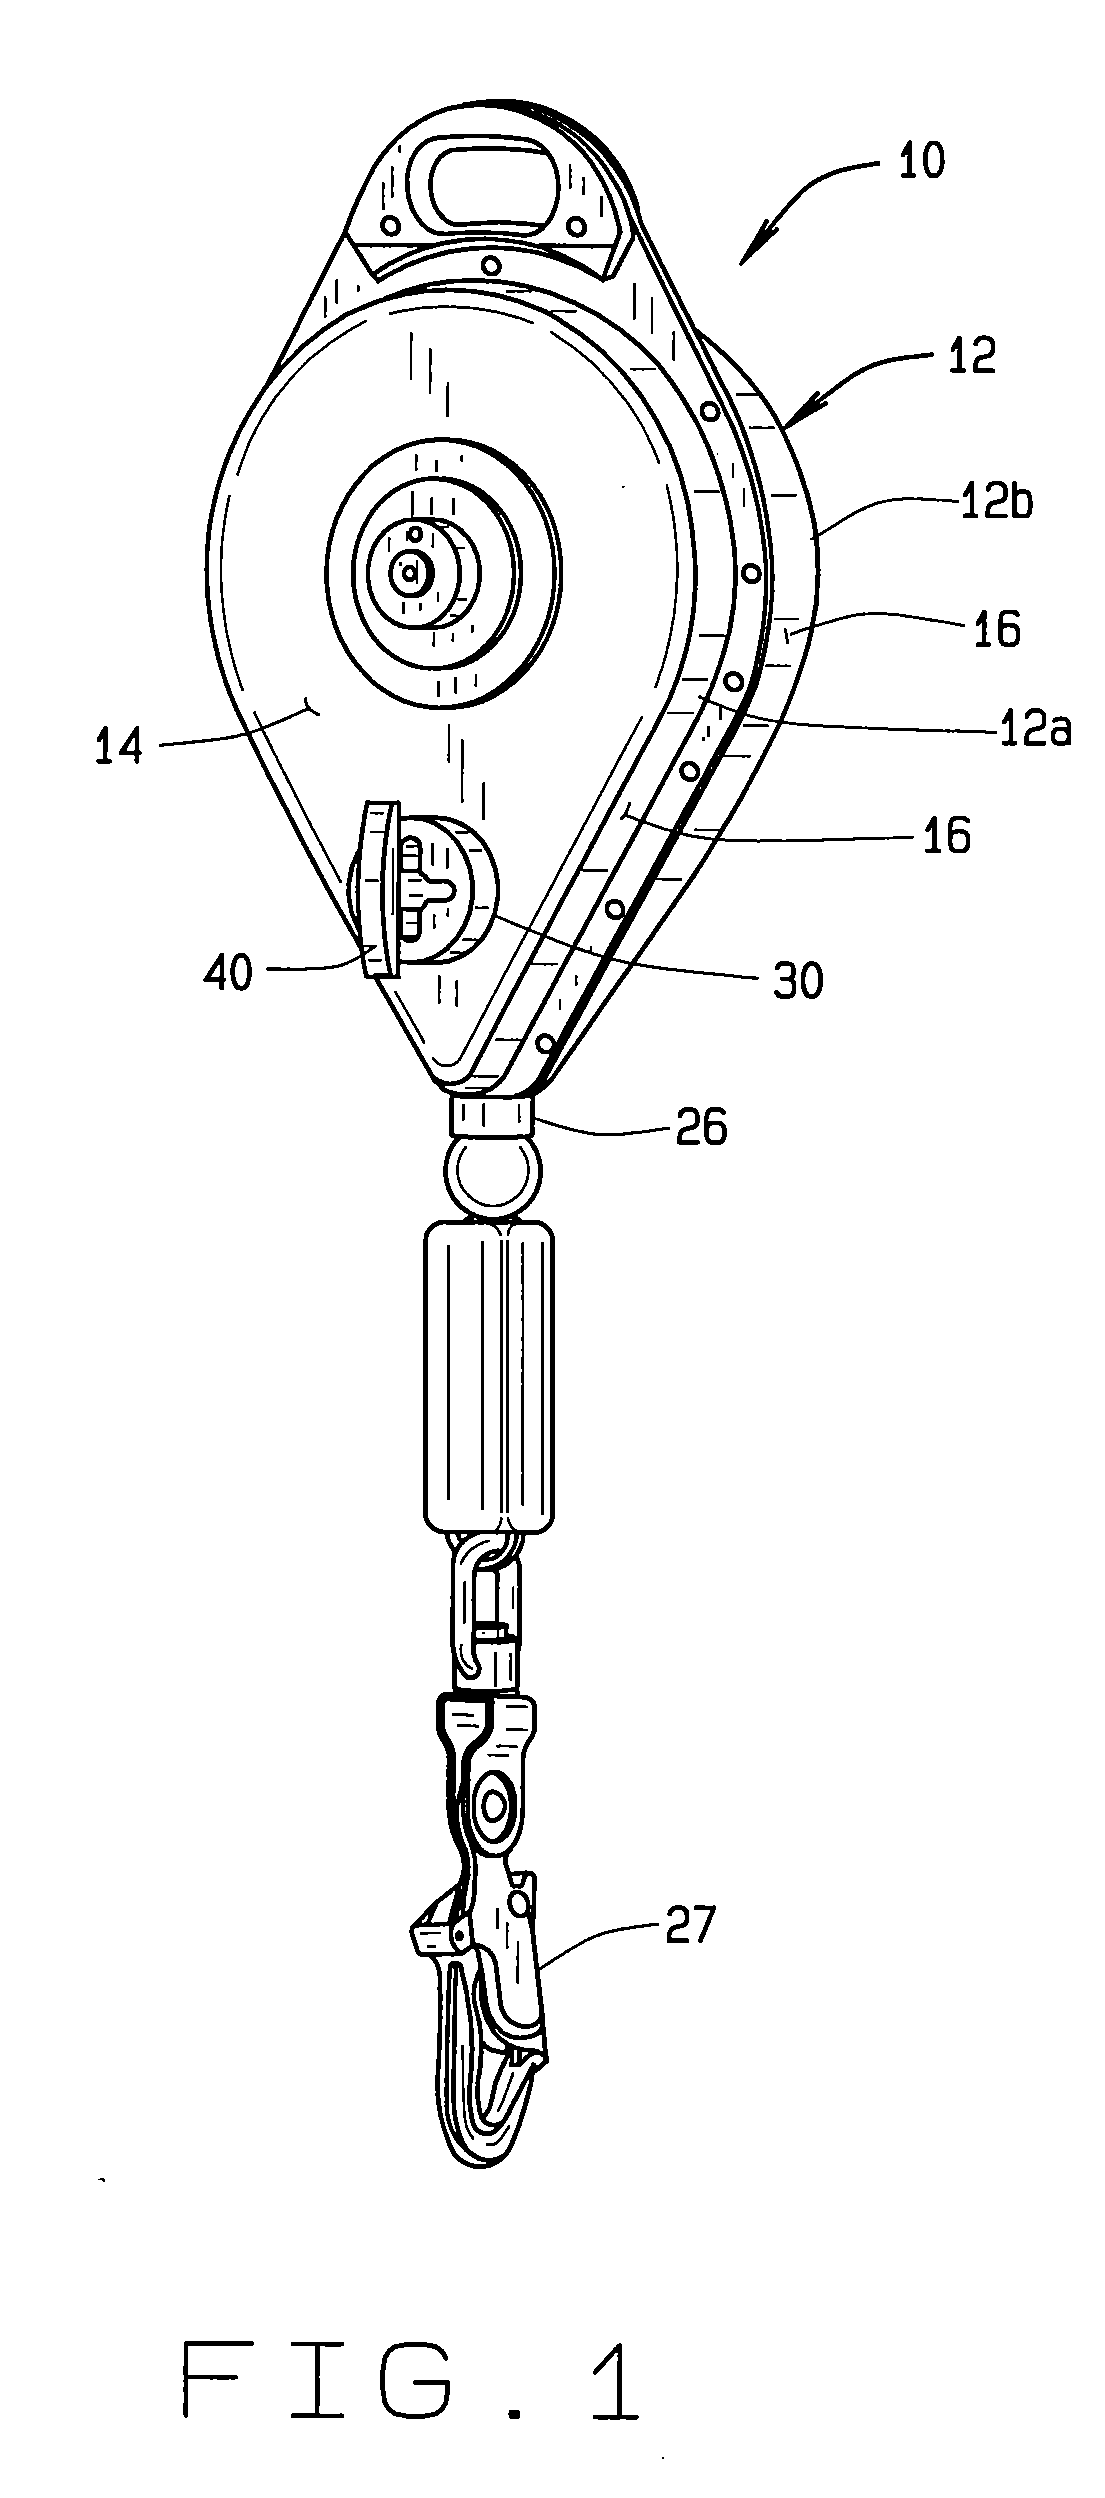 Cable reel lock for fall arrestor